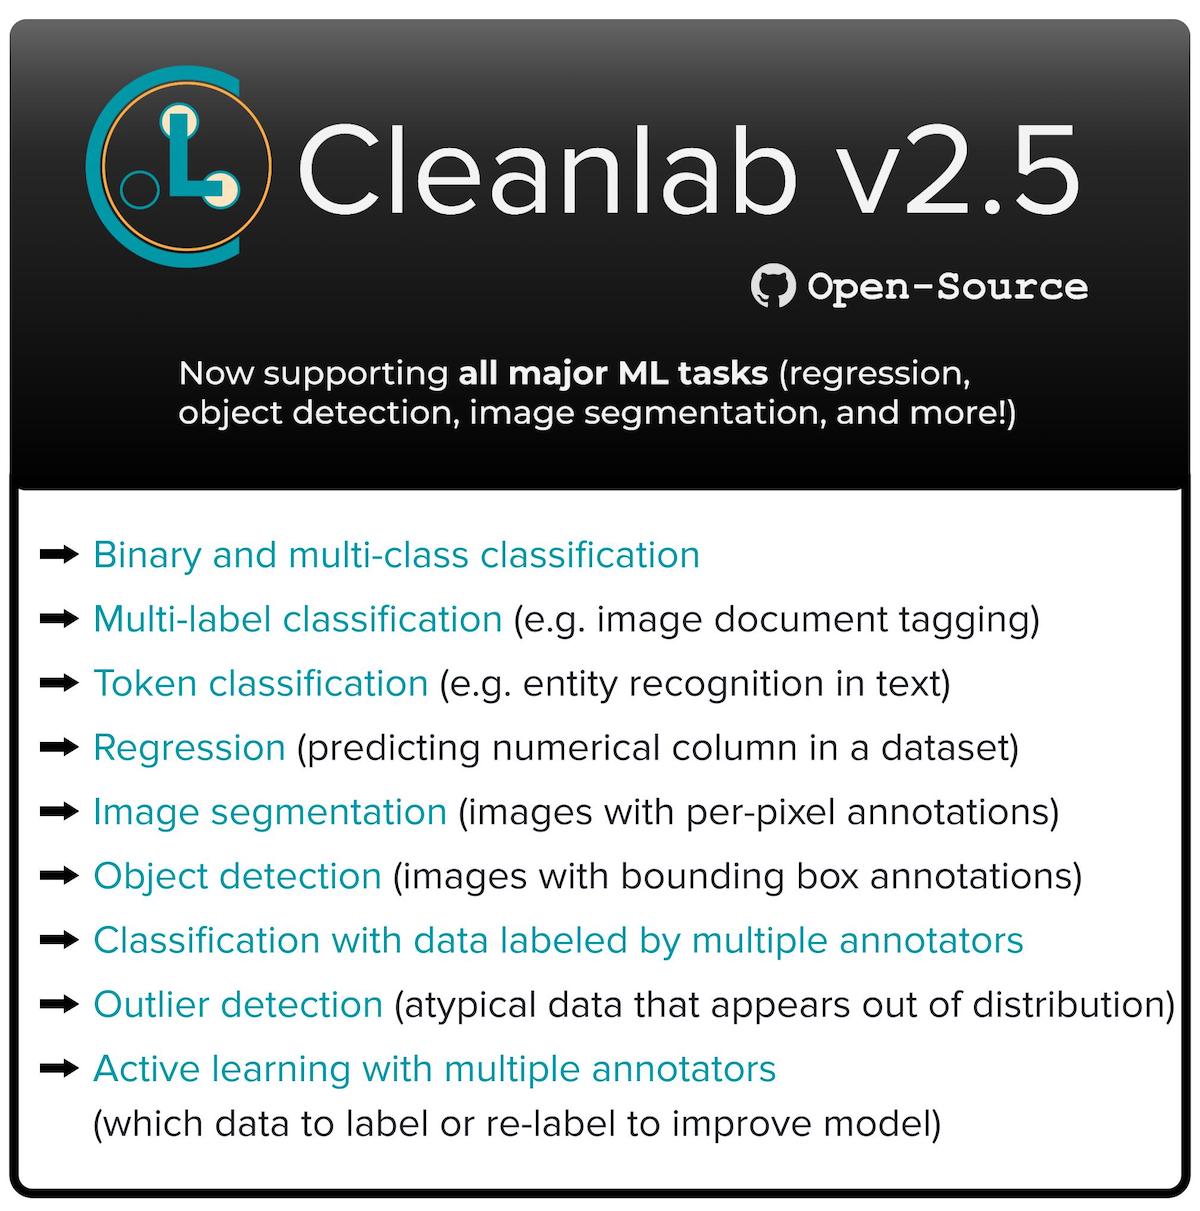 cleanlab now supports all major ML tasks — including Regression, Object Detection, and Image Segmentation